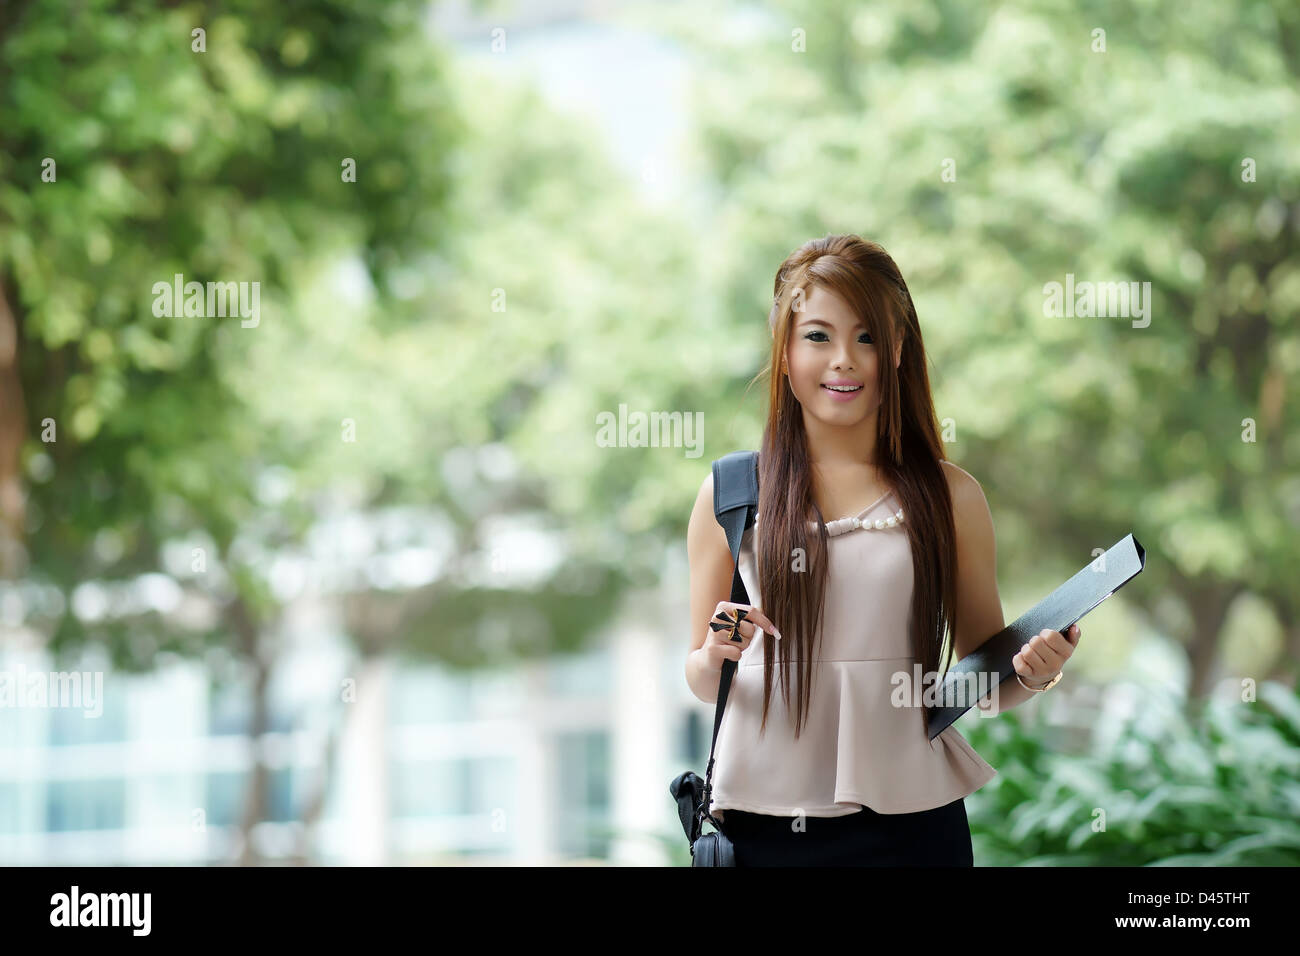 Young woman in business attire, carrying briefcase and holding folder standing outside. Stock Photo